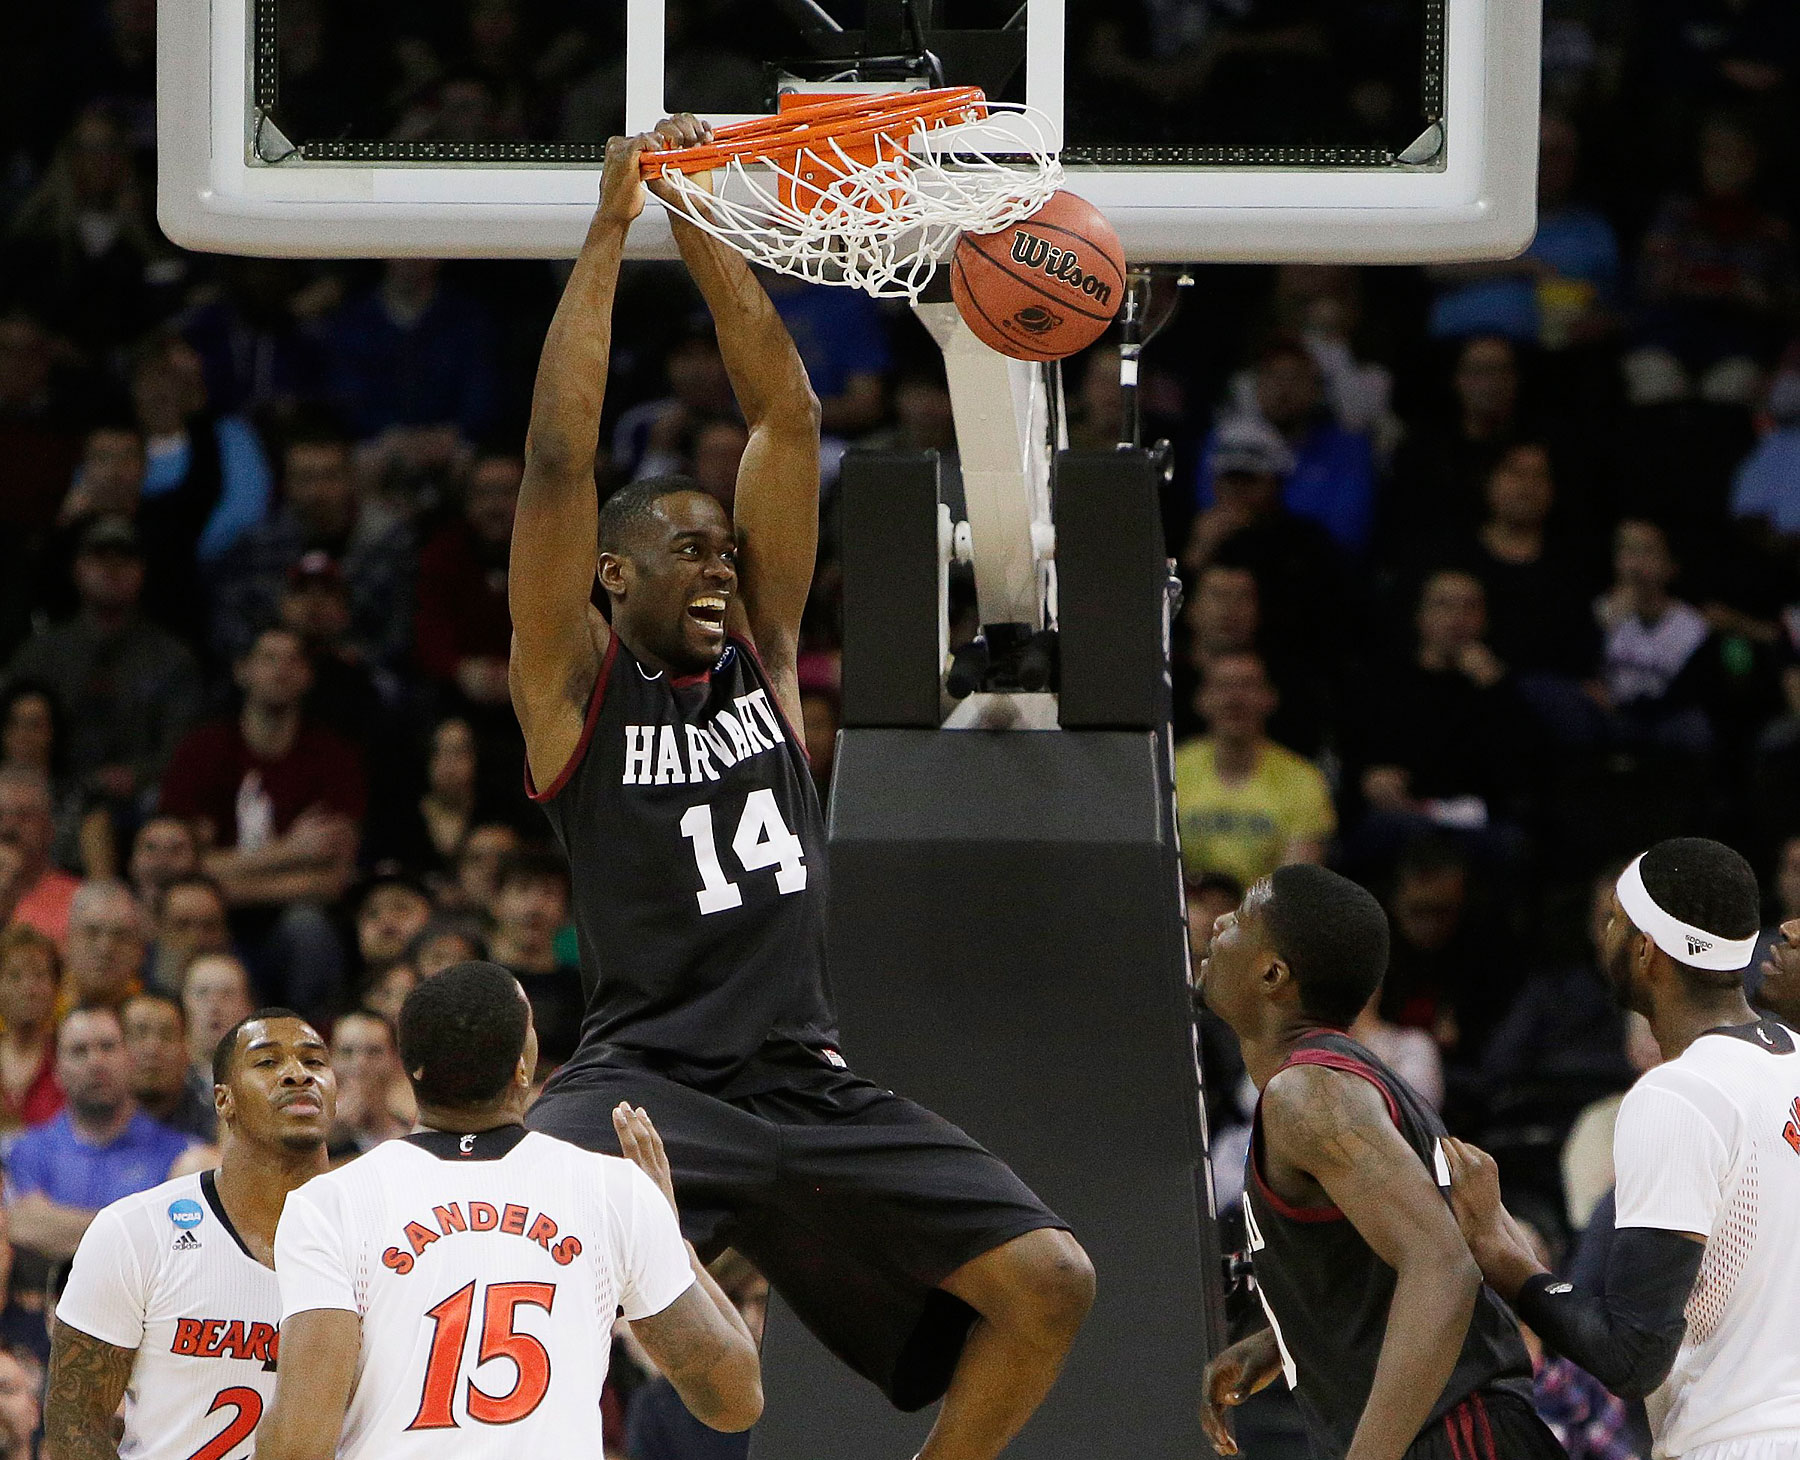 Harvardís Steve Moundou-Missi dunks against Cincinnati in the second half during the second-round of the NCAA men's college basketball tournament in Spokane, Wash., March 20, 2014. 